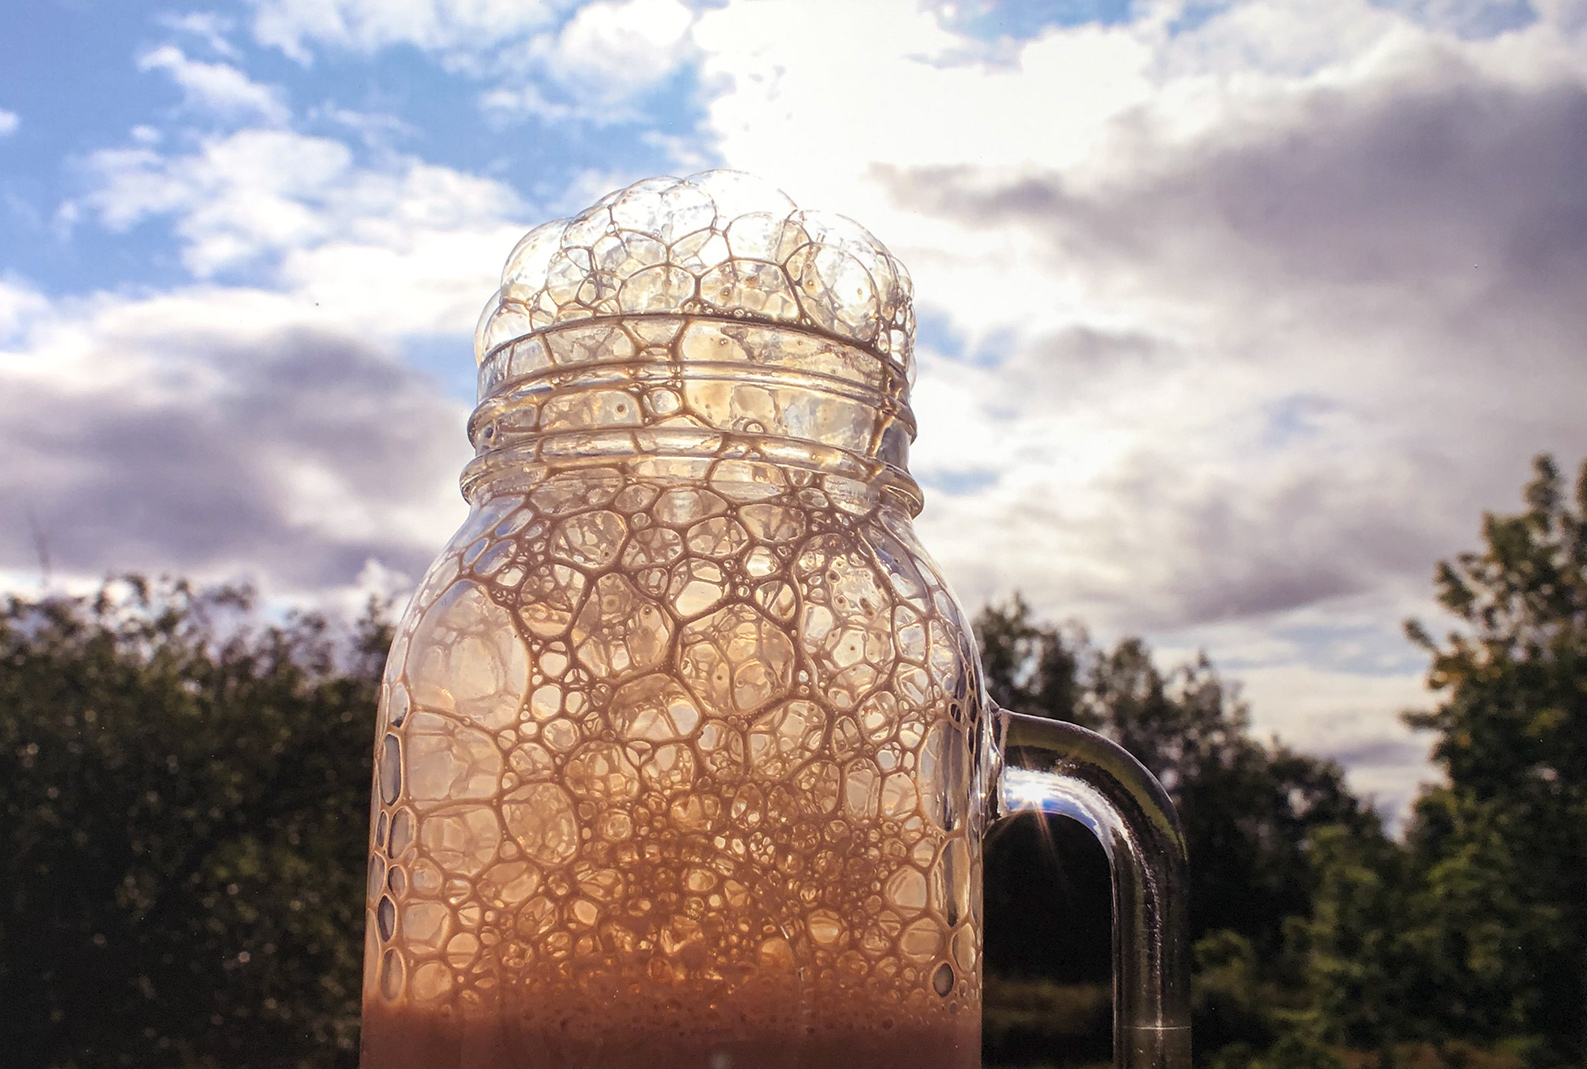 Photo of glass jar with liquid foaming through the top. Artist: Augrey Mclaughlin, "Bubbles", Cony High School